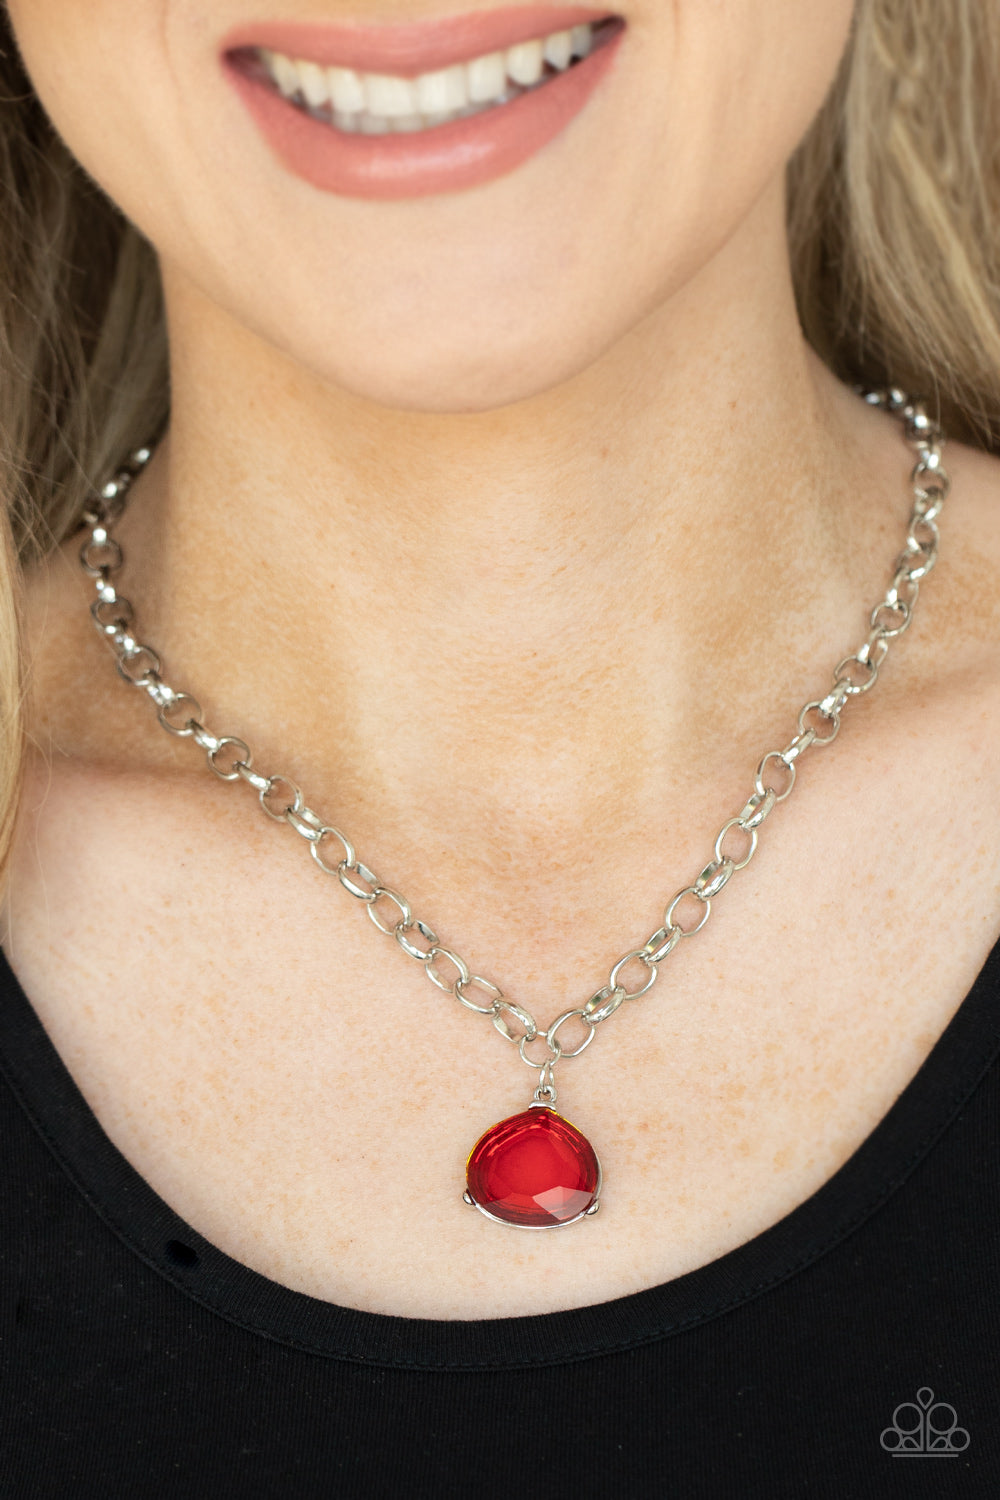 Gallery Gem - red - Paparazzi necklace